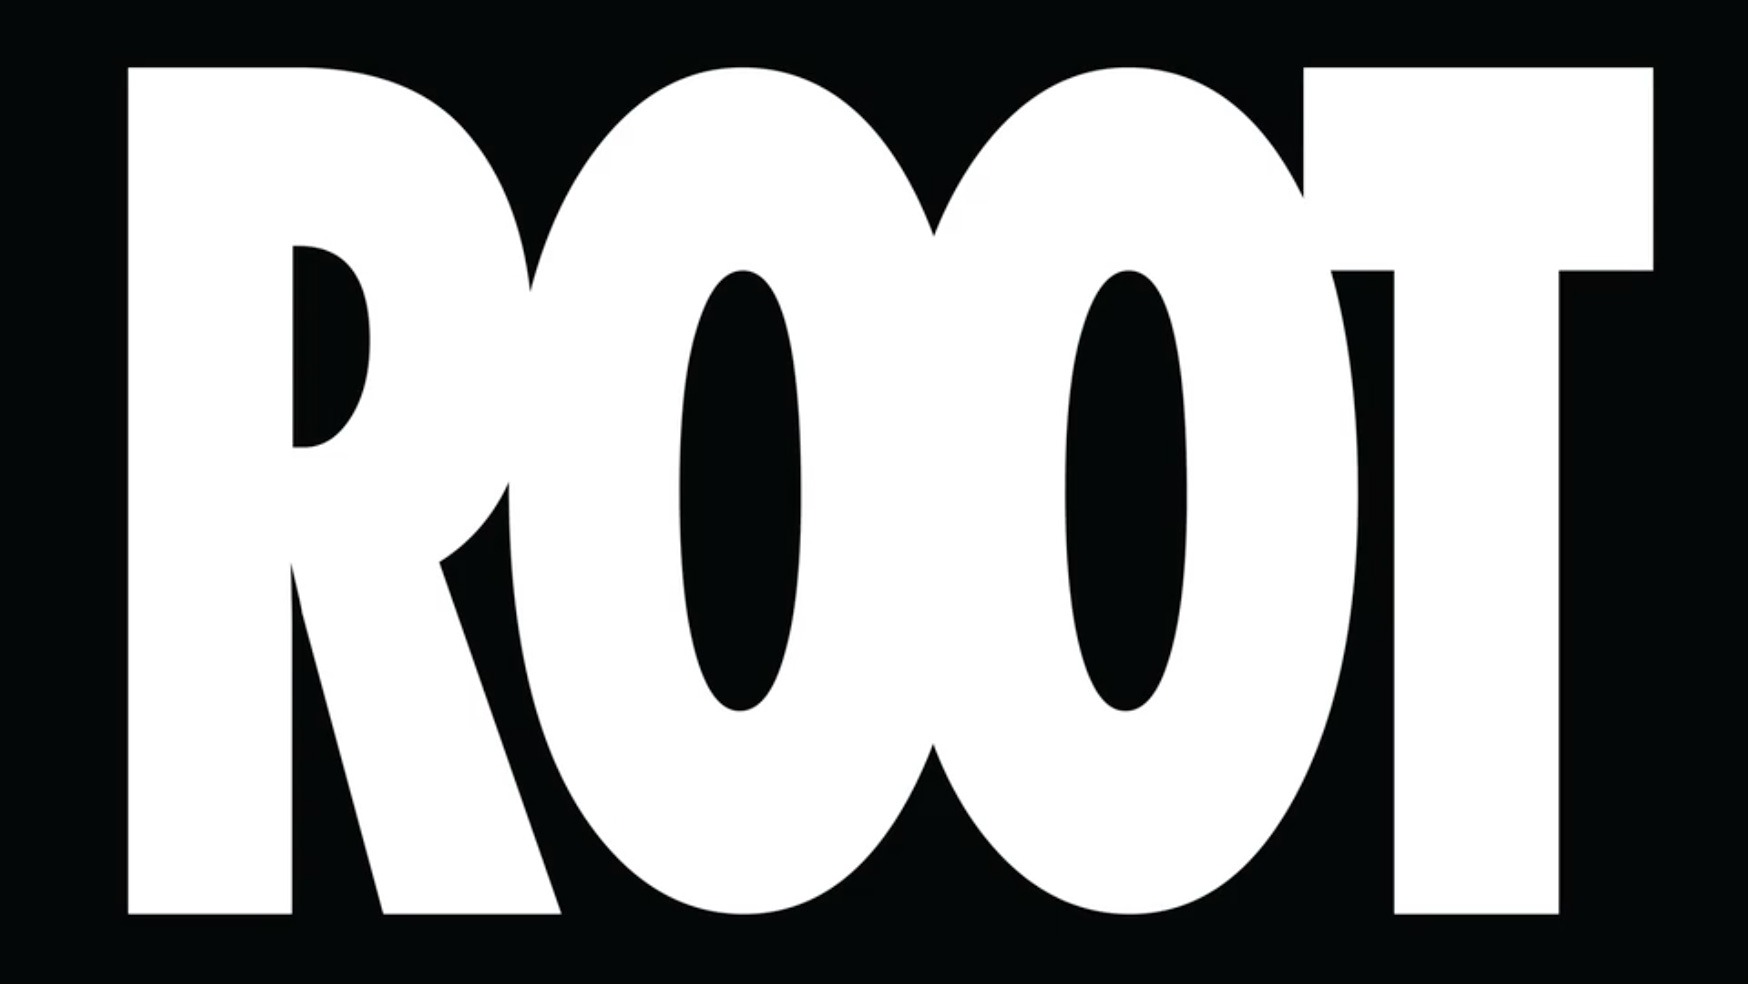 PUBLIC SERVICE ANNOUNCEMENT | ROOT! presented by ROOT!